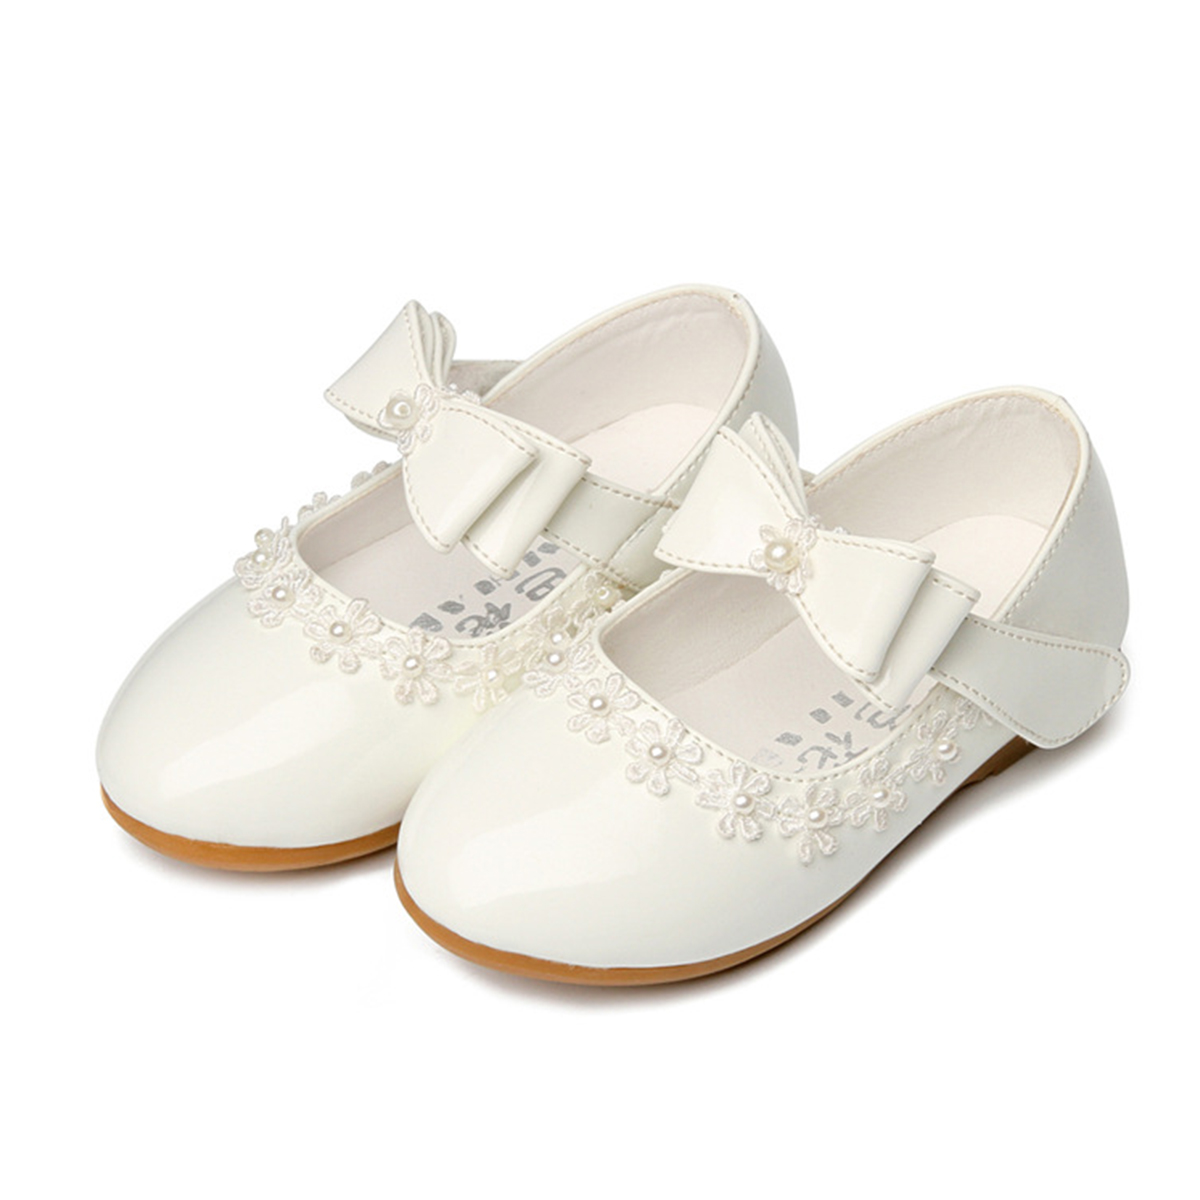 Hawee Dress-up Mary Jane Shoes Pearl Bowknot Dress Shoes (Toddler Girls & Little Girls & Big Girls) - image 1 of 6